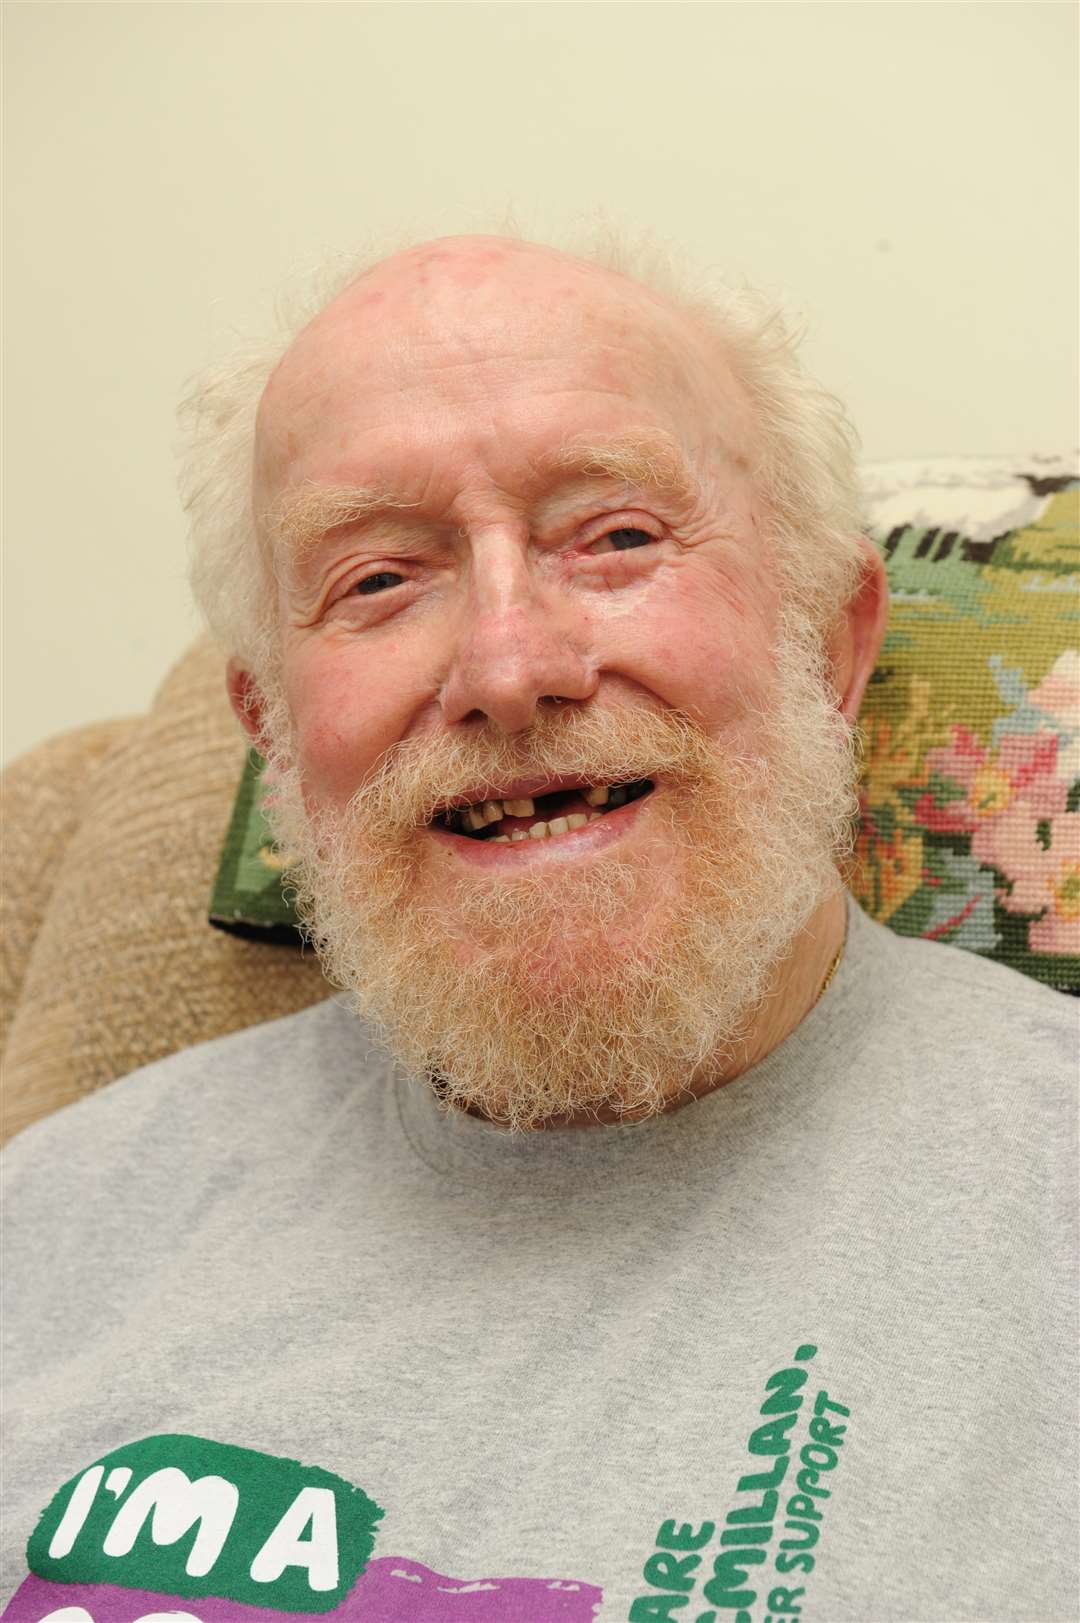 Richard Keeling before his charity shave in memory of his late wife